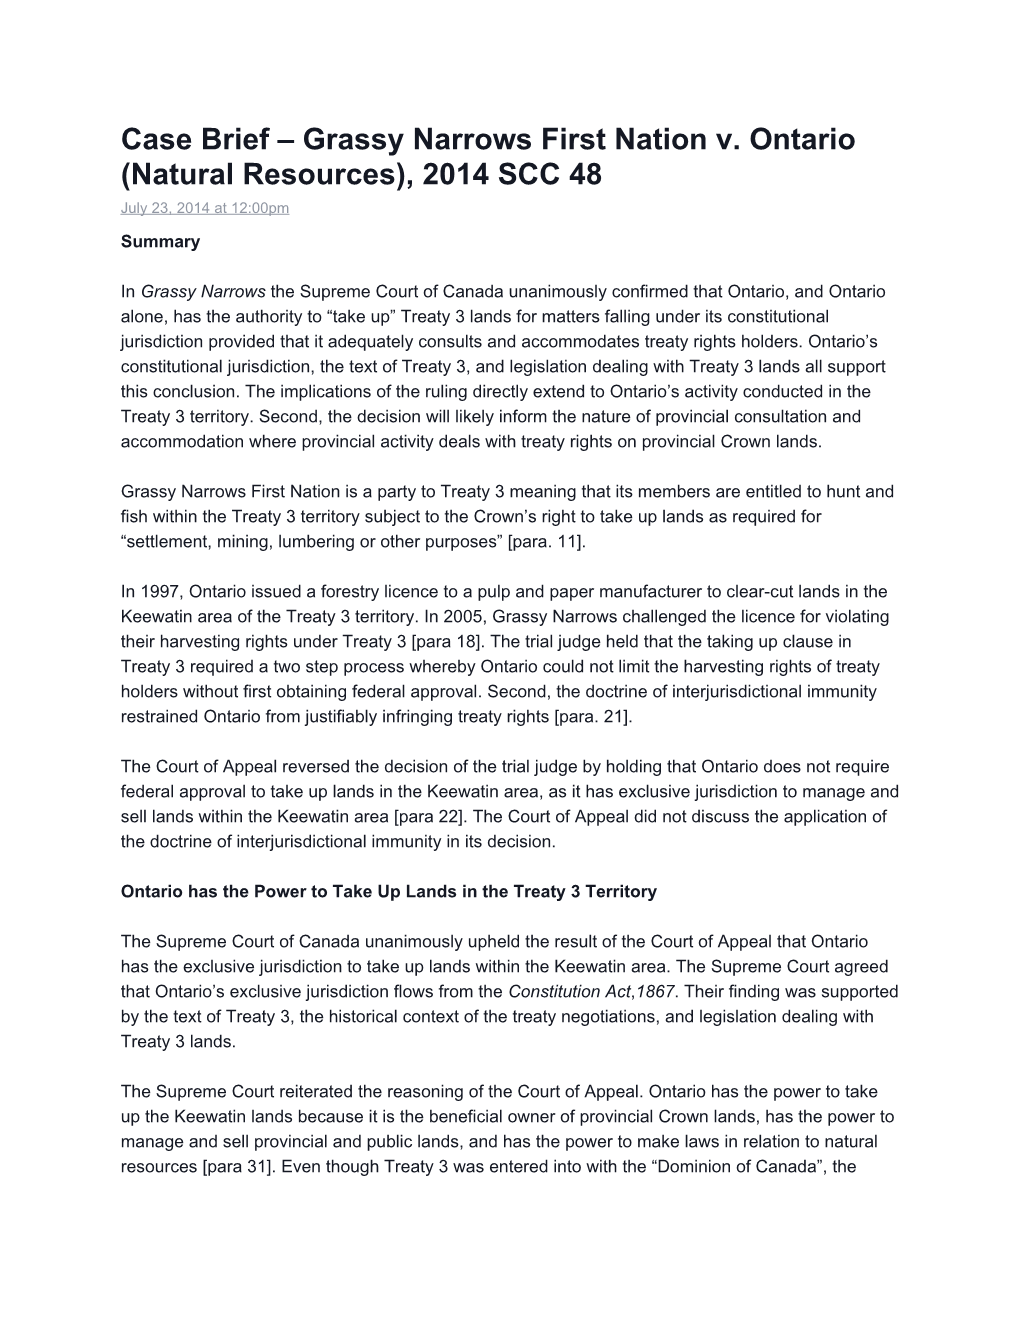 Case Brief Grassy Narrows First Nation V. Ontario (Natural Resources), 2014 SCC 48